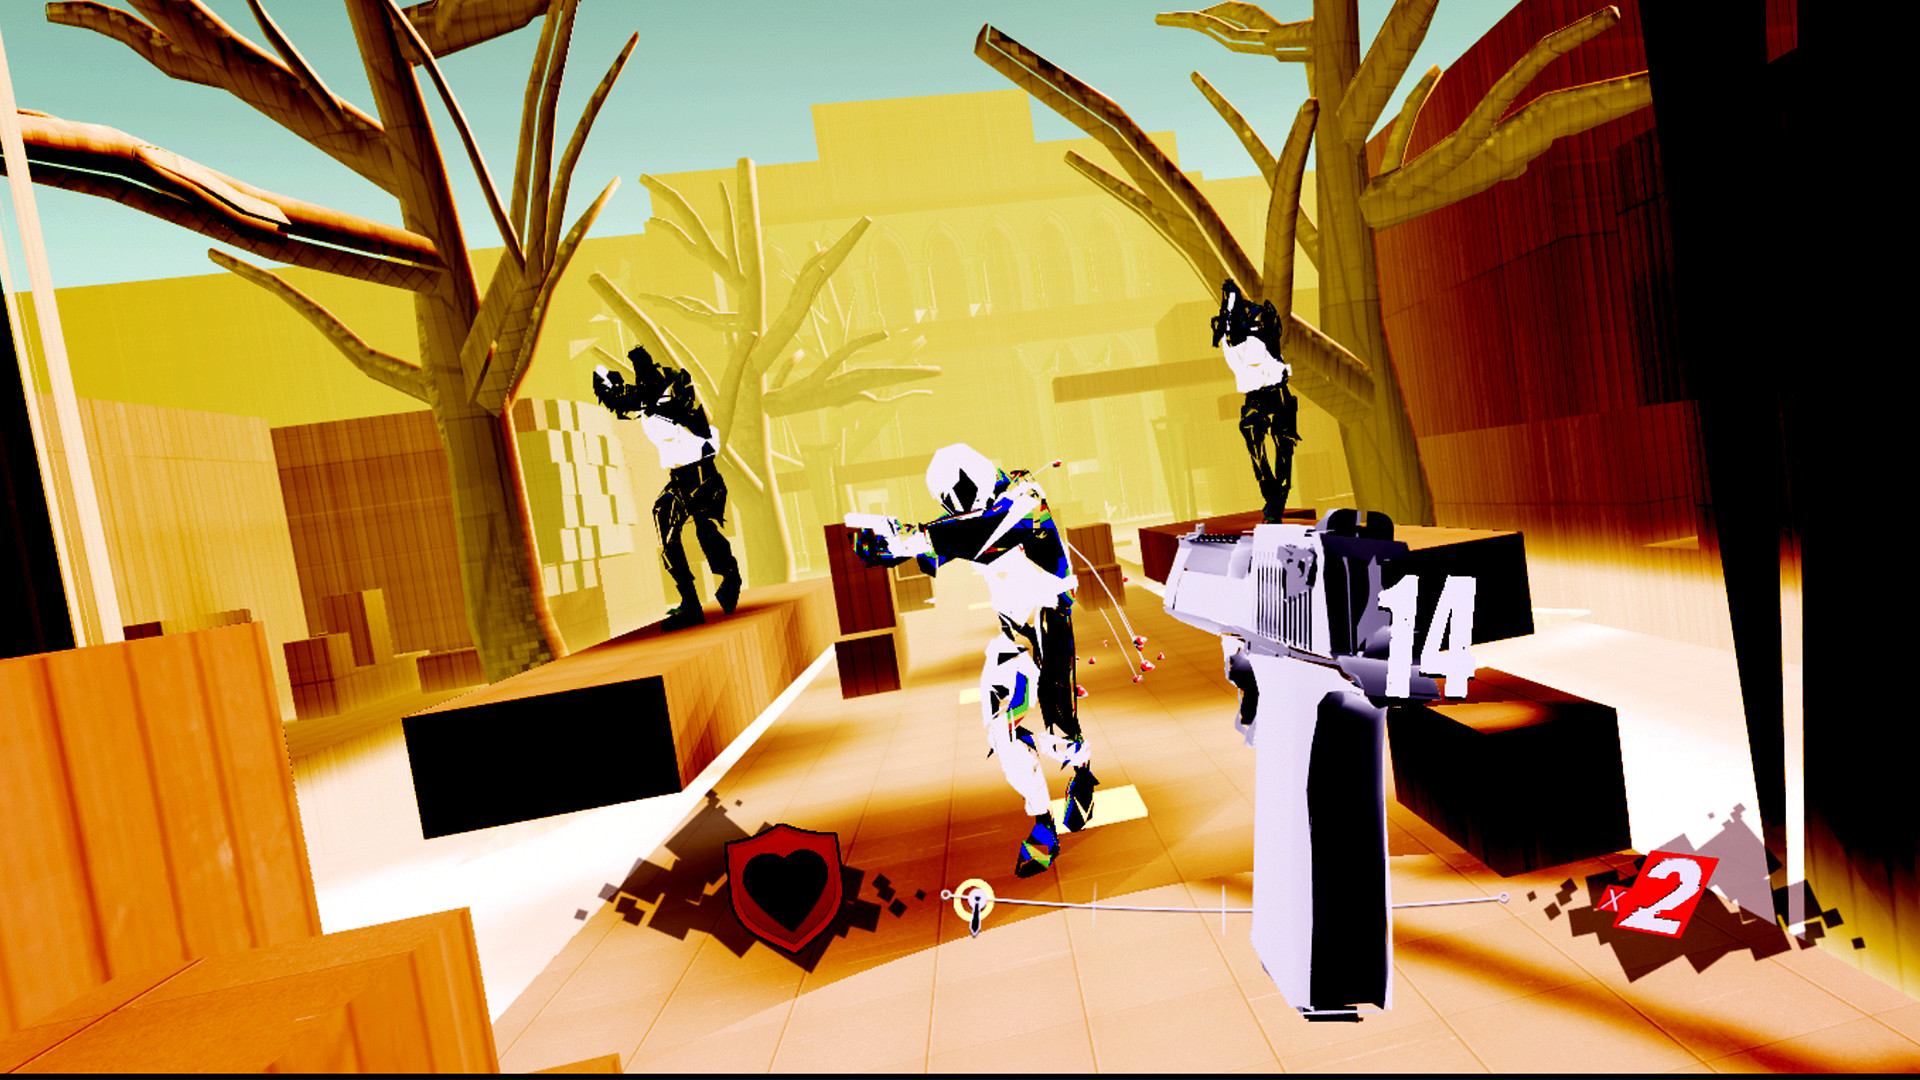 Quest 2 fitness games: A group of enemies are unaware that the player's character is ready to shoot them in Pistol Whip